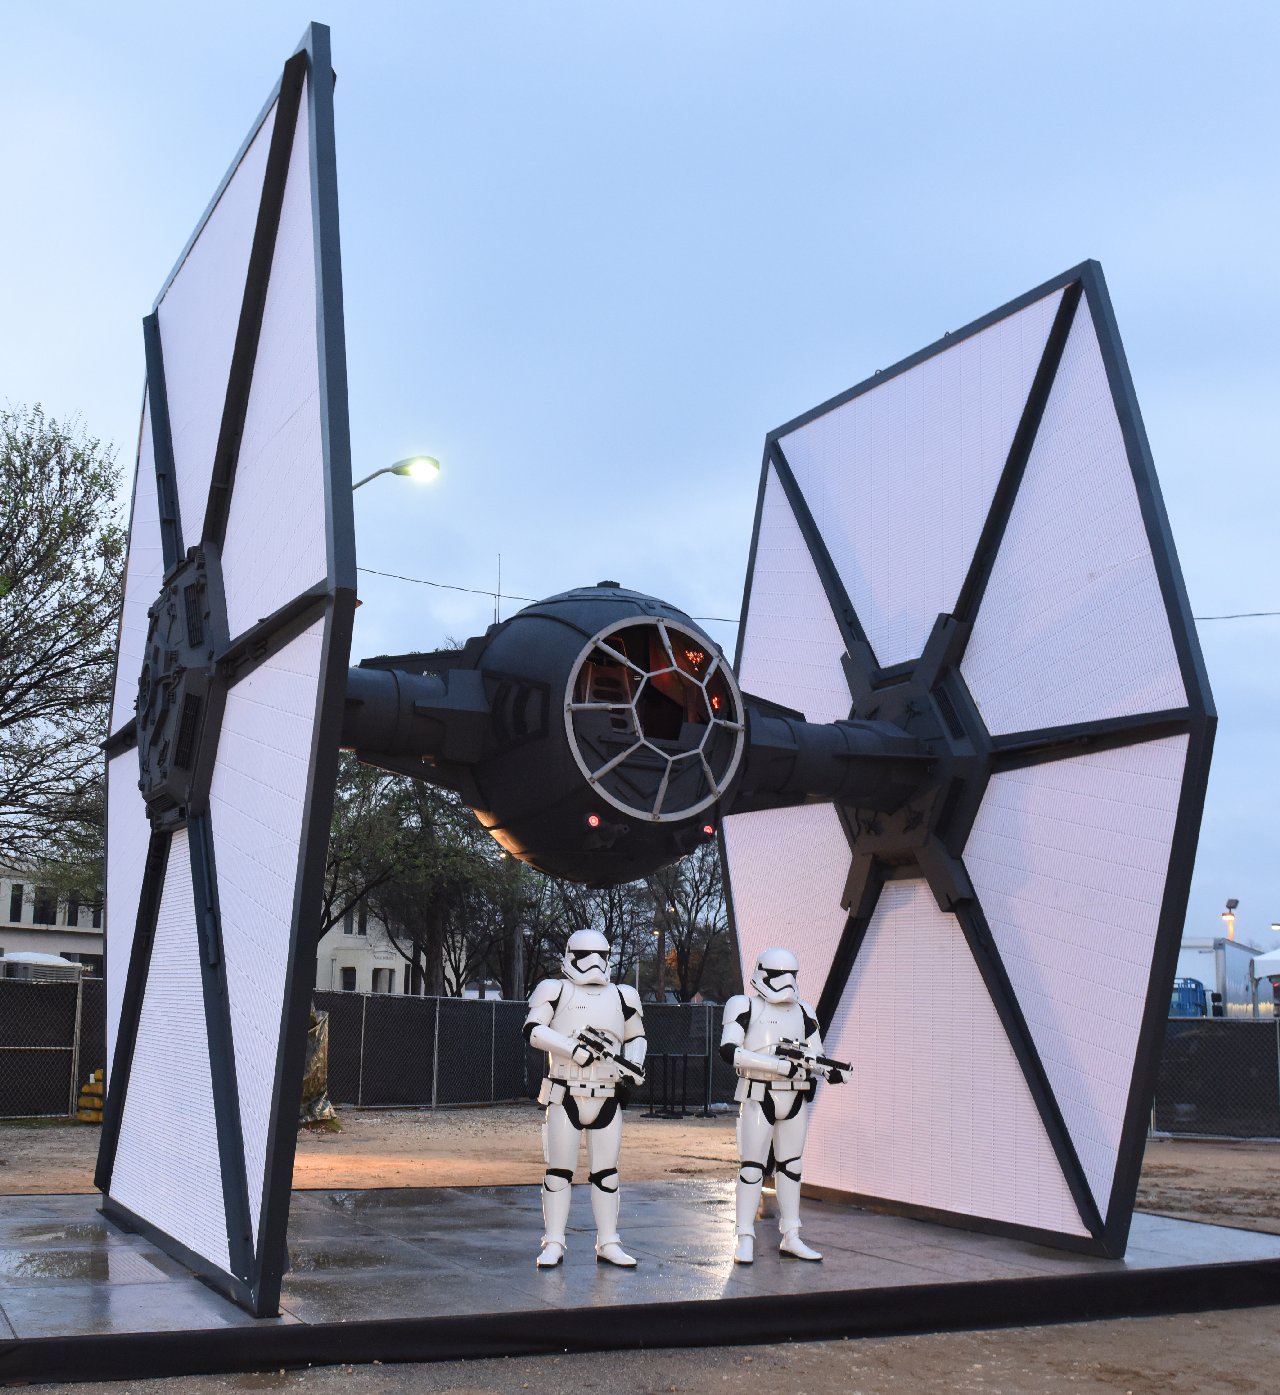 Star Wars: The Force Awakens at SXSW